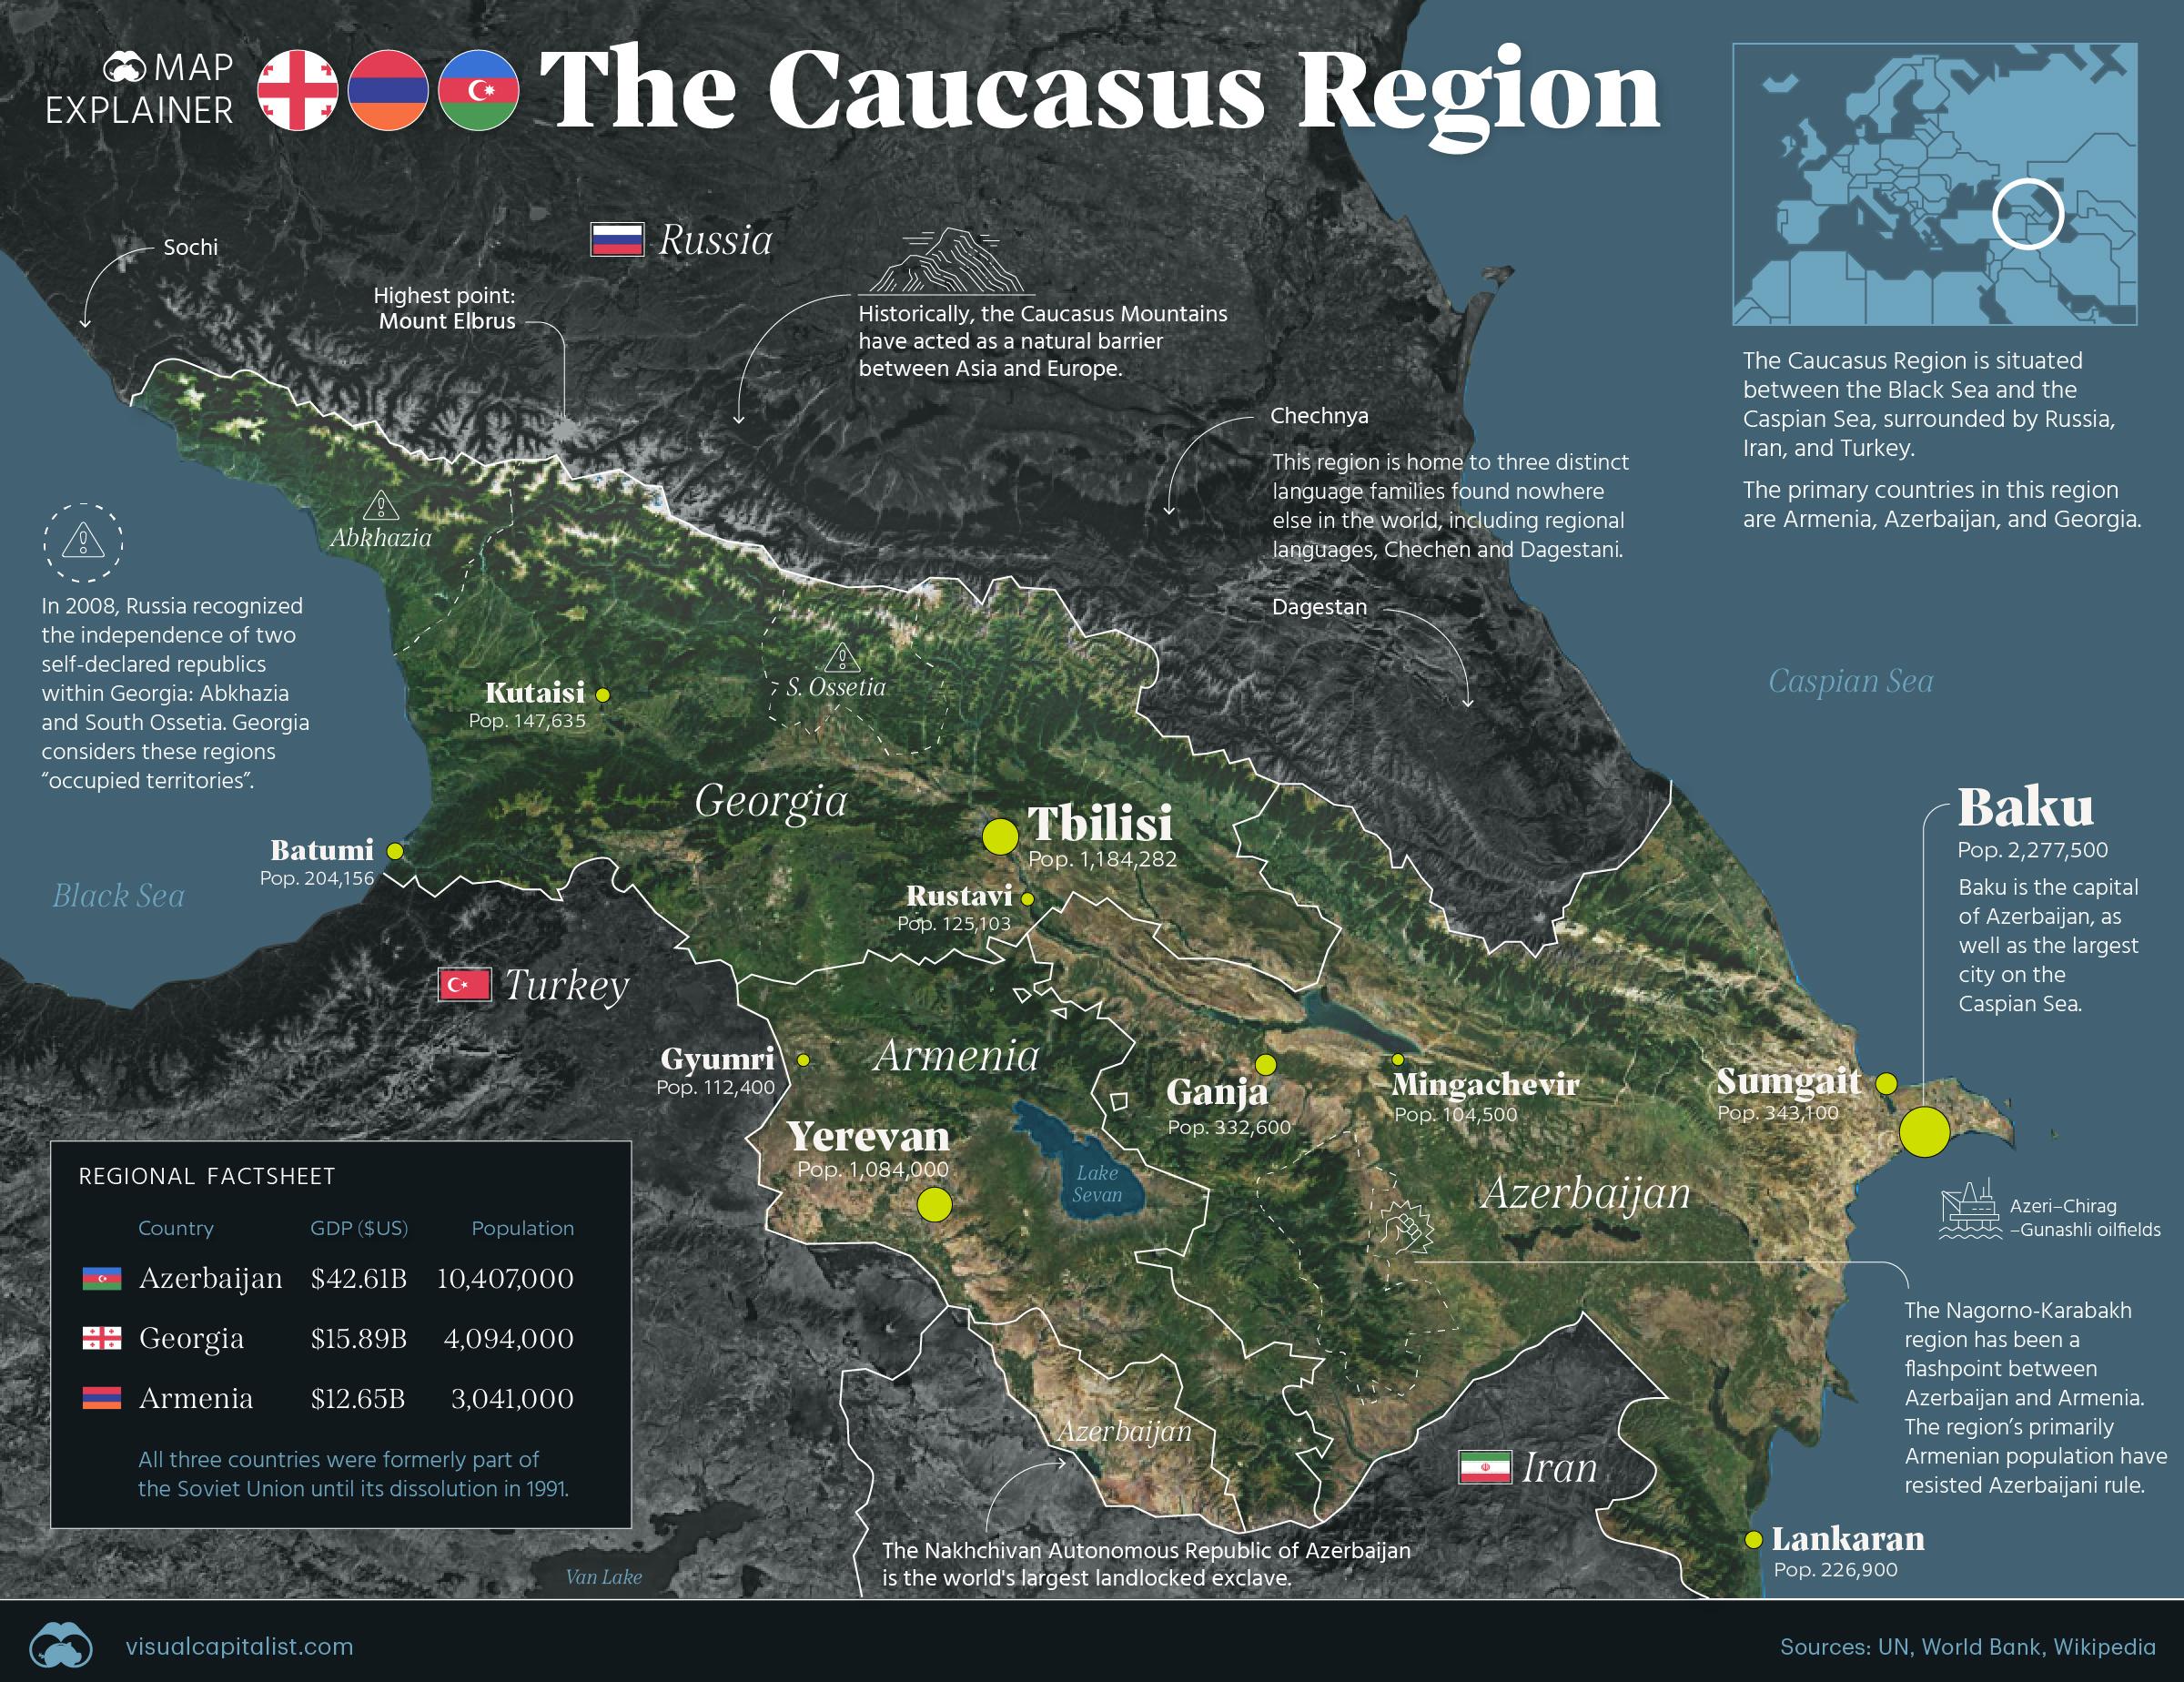 The Enigmatic Beauty of the Caucasus